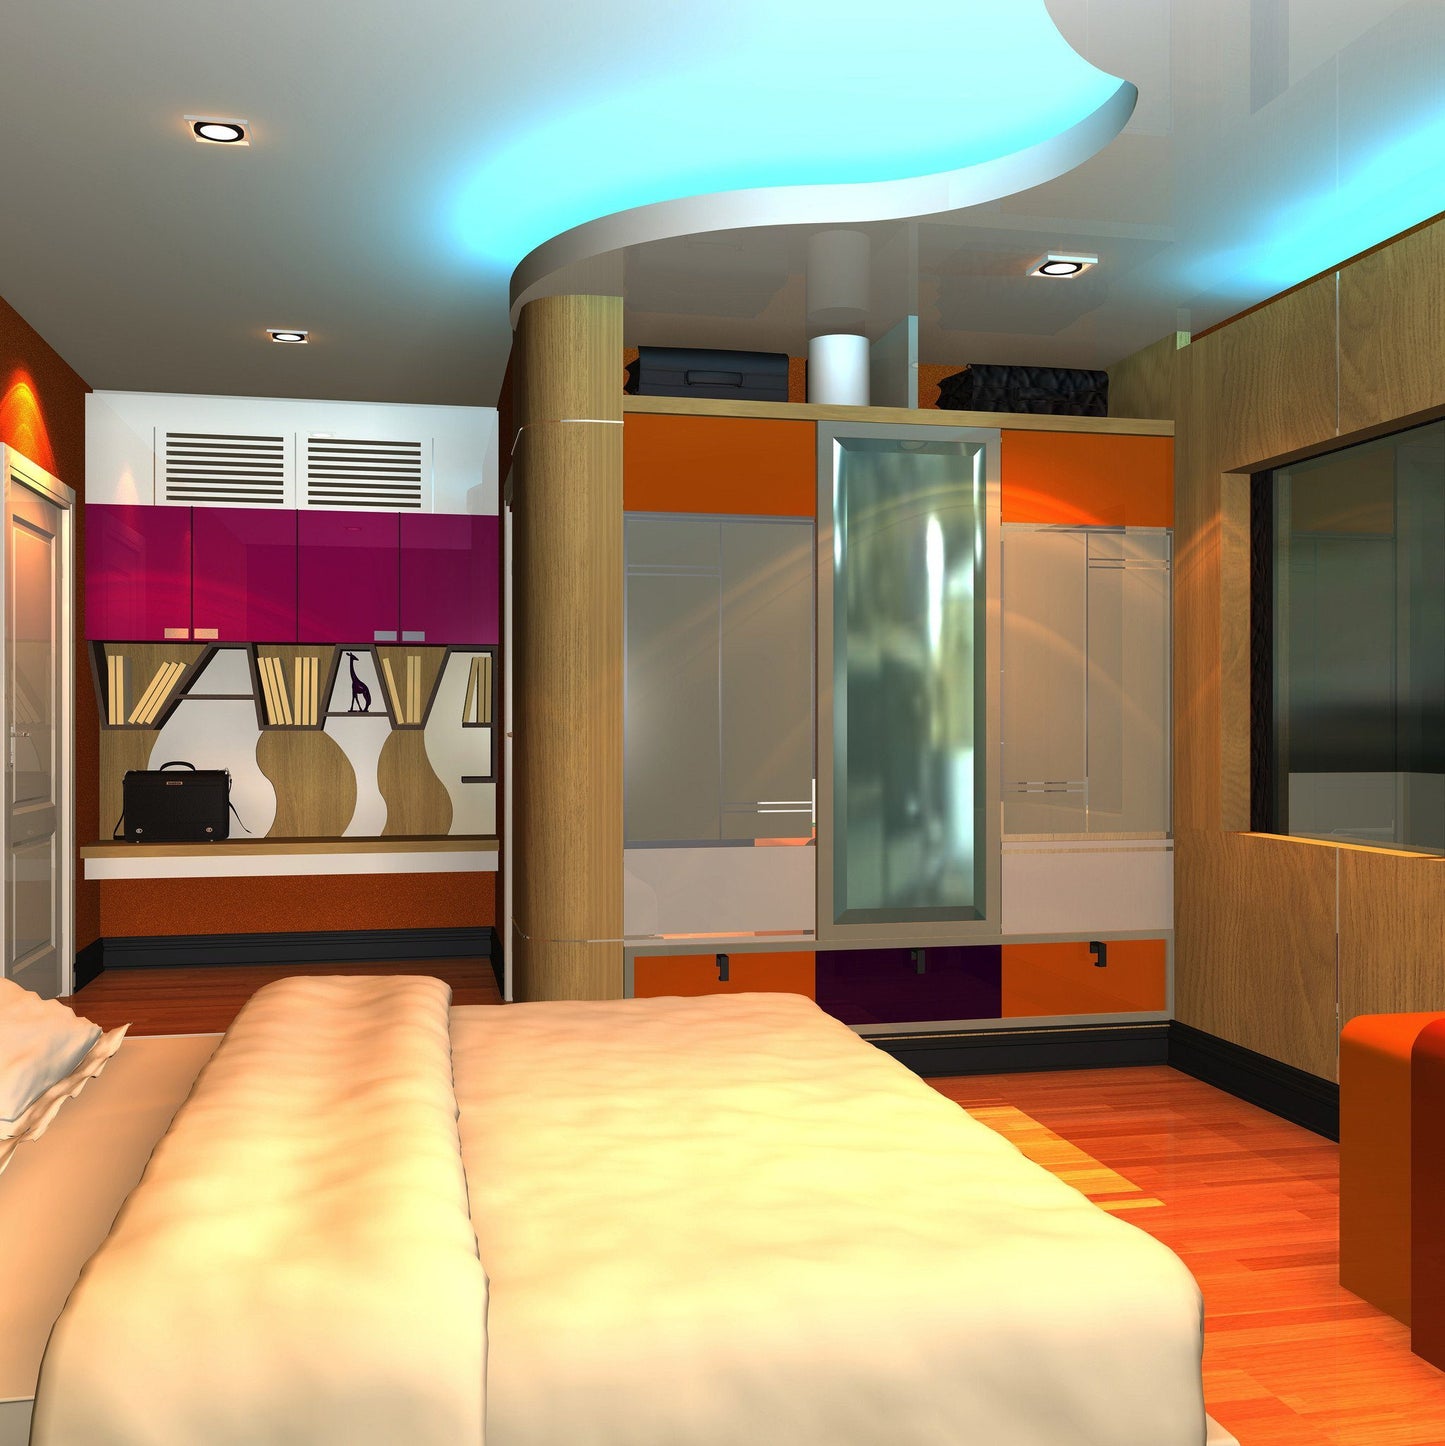 modern hotel room with orange and magenta accents, cool white blue light in cove above room